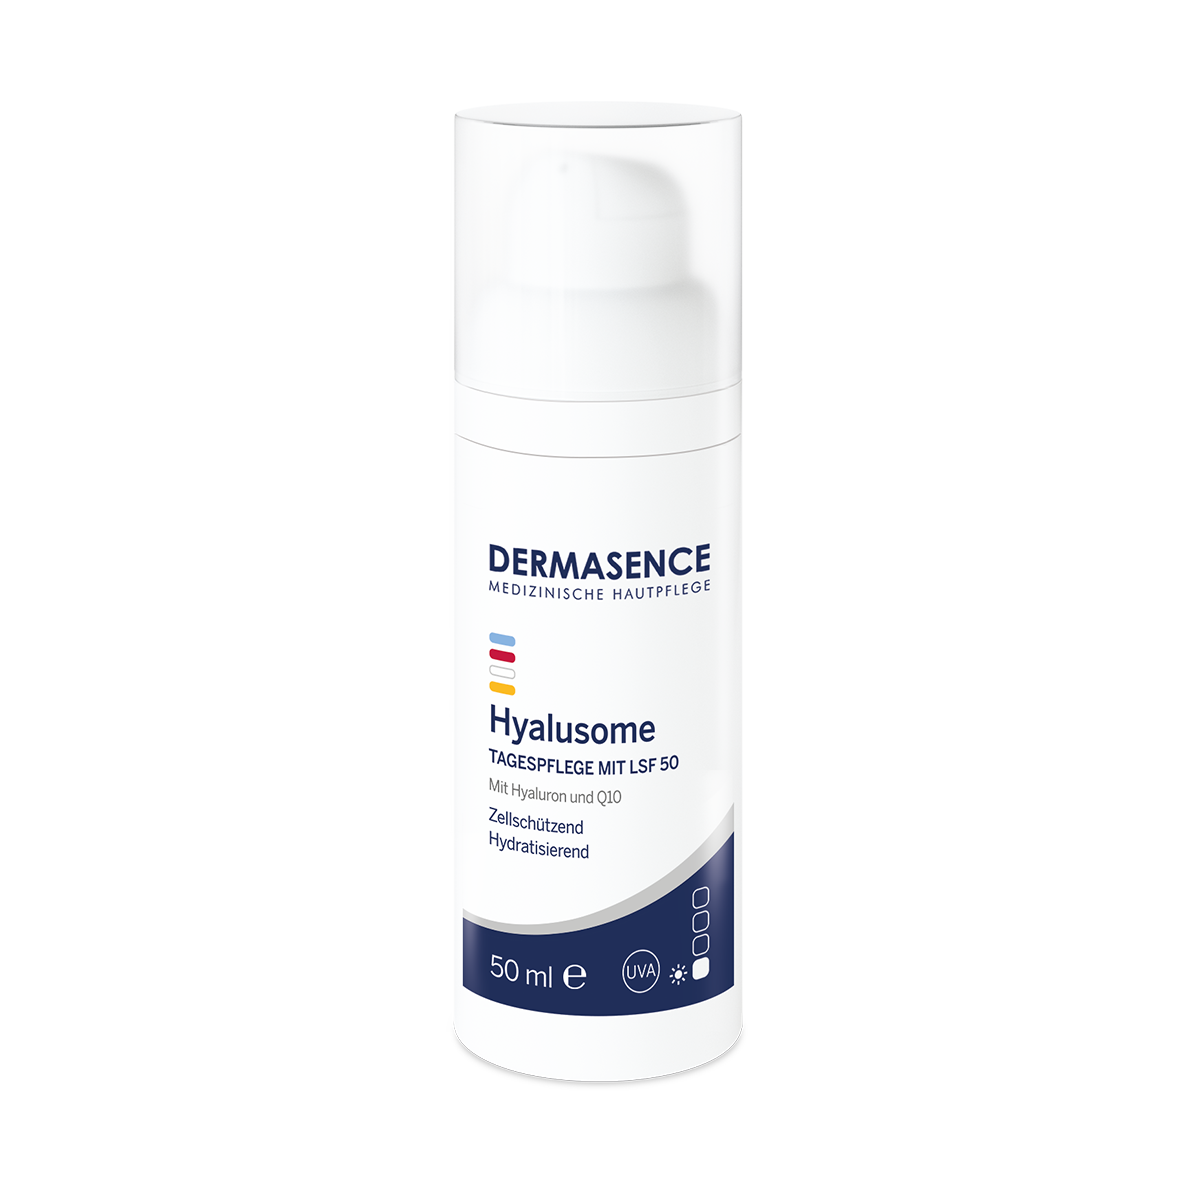 DERMASENCE Hyalusome Day Cream with SPF 50